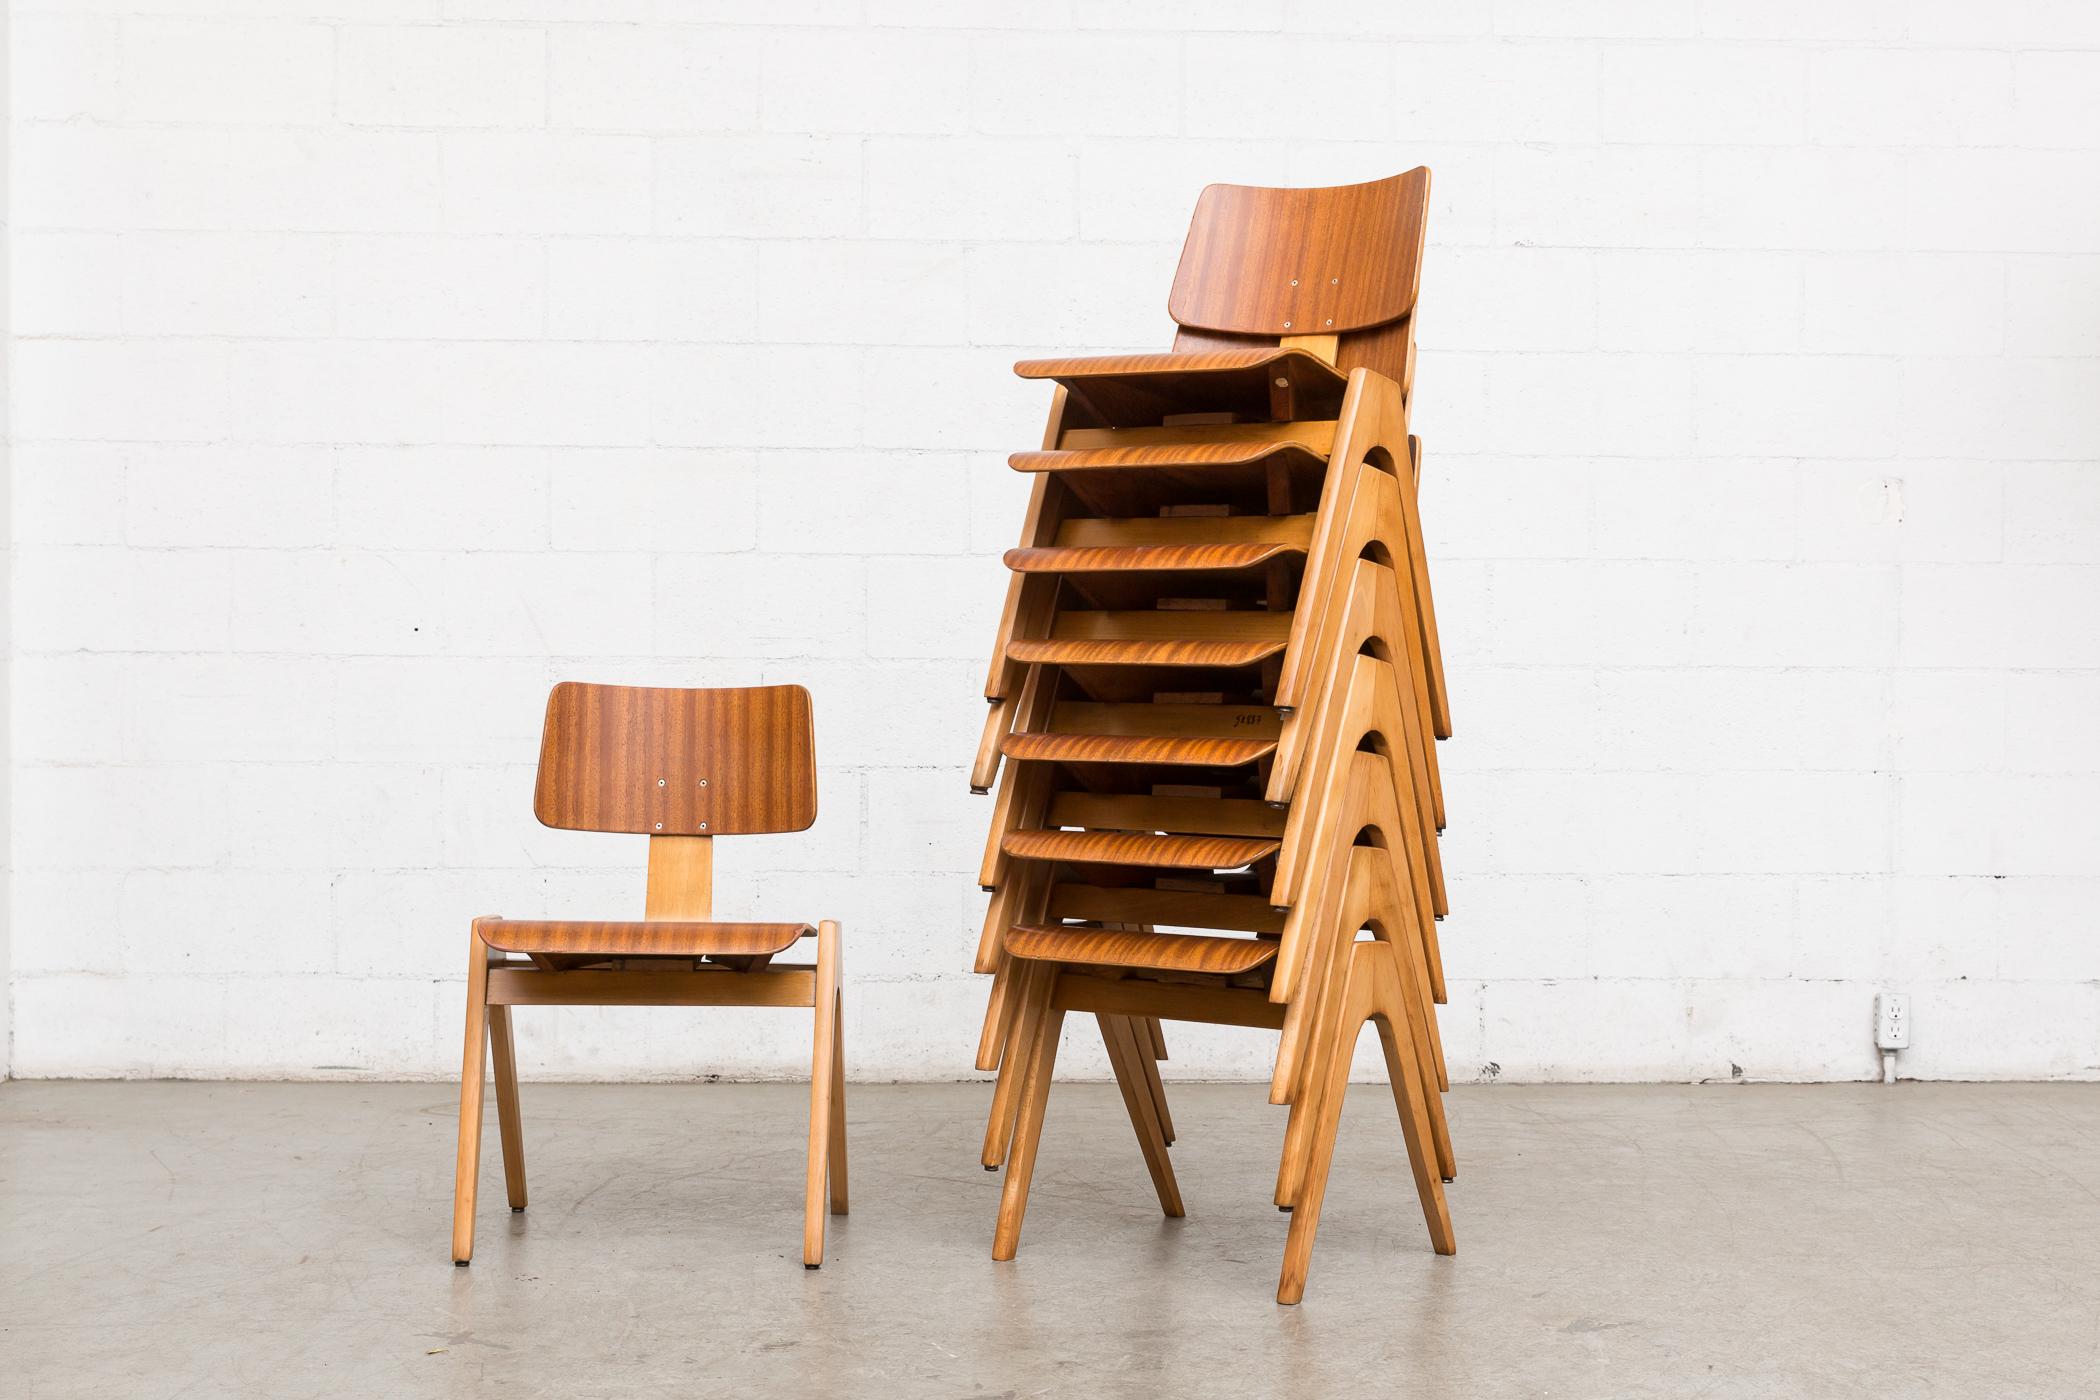 In 1950, robin day designed the 'Hillestak' chair, which was composed of a moulded plywood seat and separate back, secured within a beech ‘a’ frame. This stackable chair was relatively cheap and stylish for its time. Like many of his designs, the